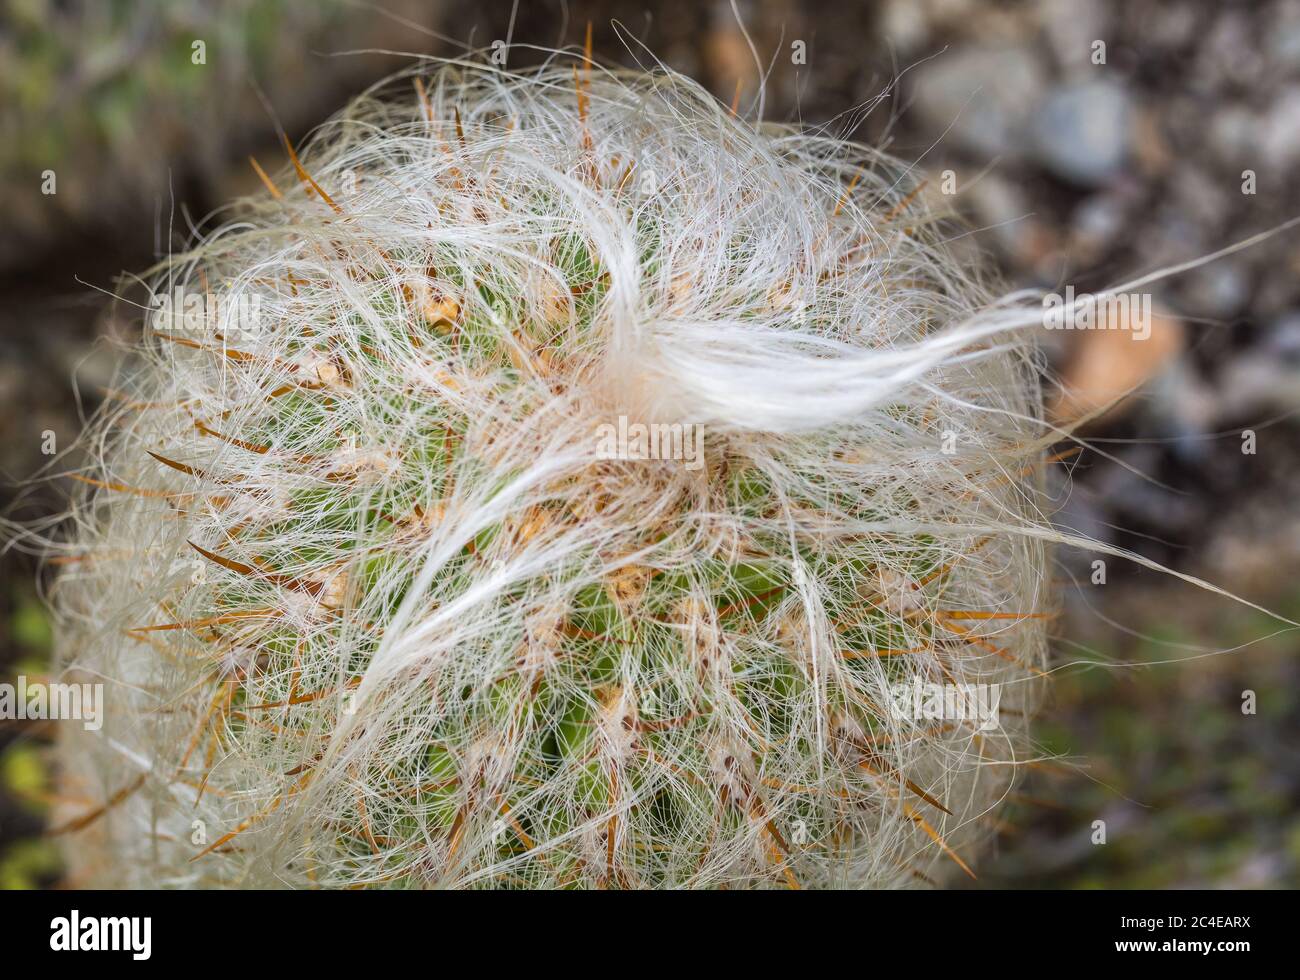 Oreocereus celsianus. Cactus from South America that looks very old. Stock Photo